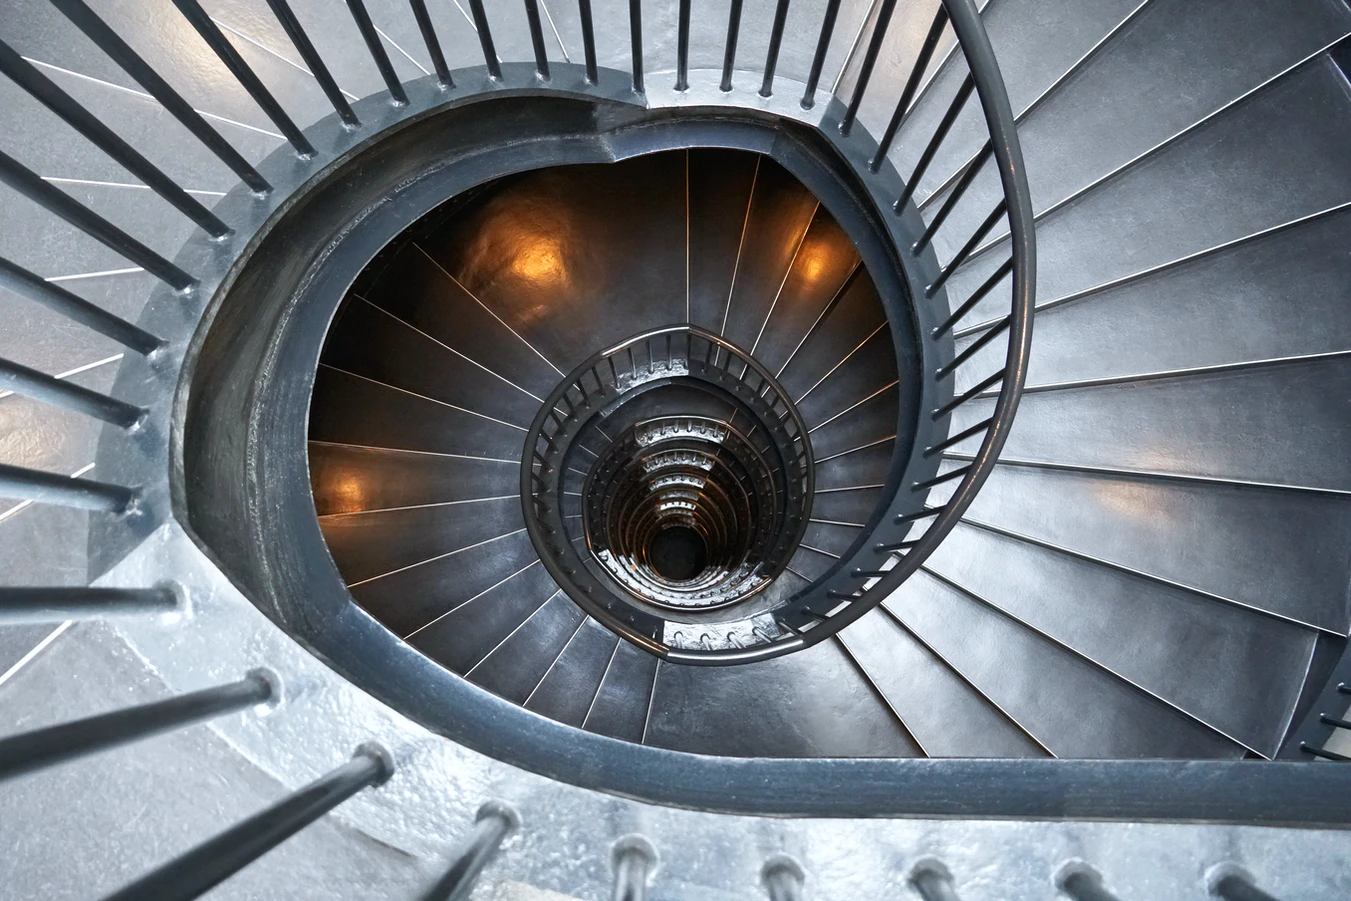 A seemingly endless spiral staircase as seen from above. Looking like an endless hole.